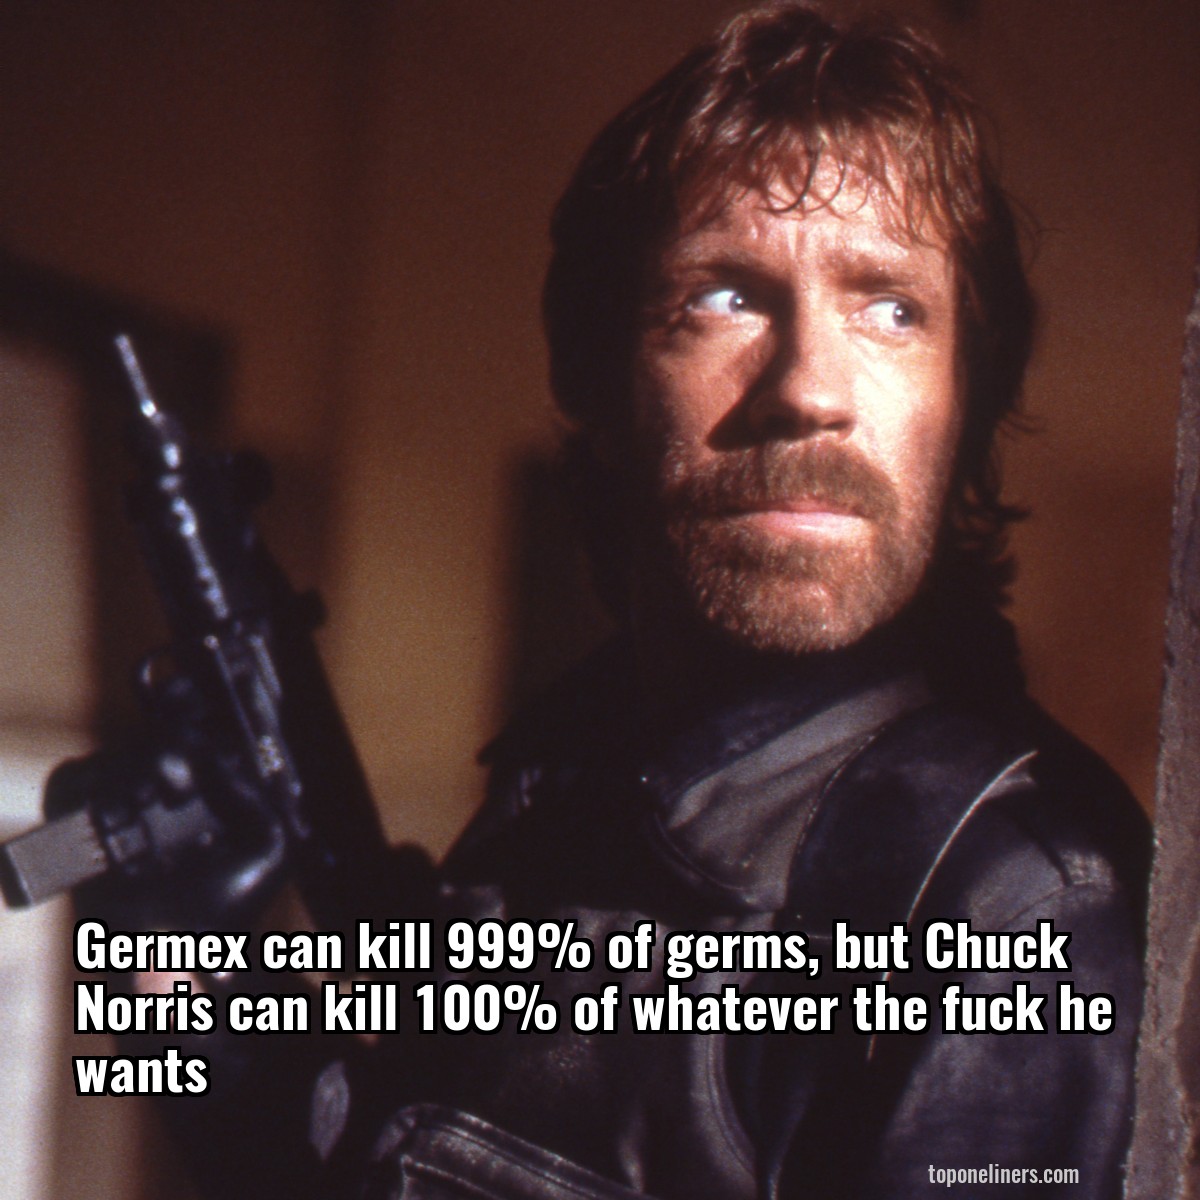 Germex can kill 999% of germs, but Chuck Norris can kill 100% of whatever the fuck he wants